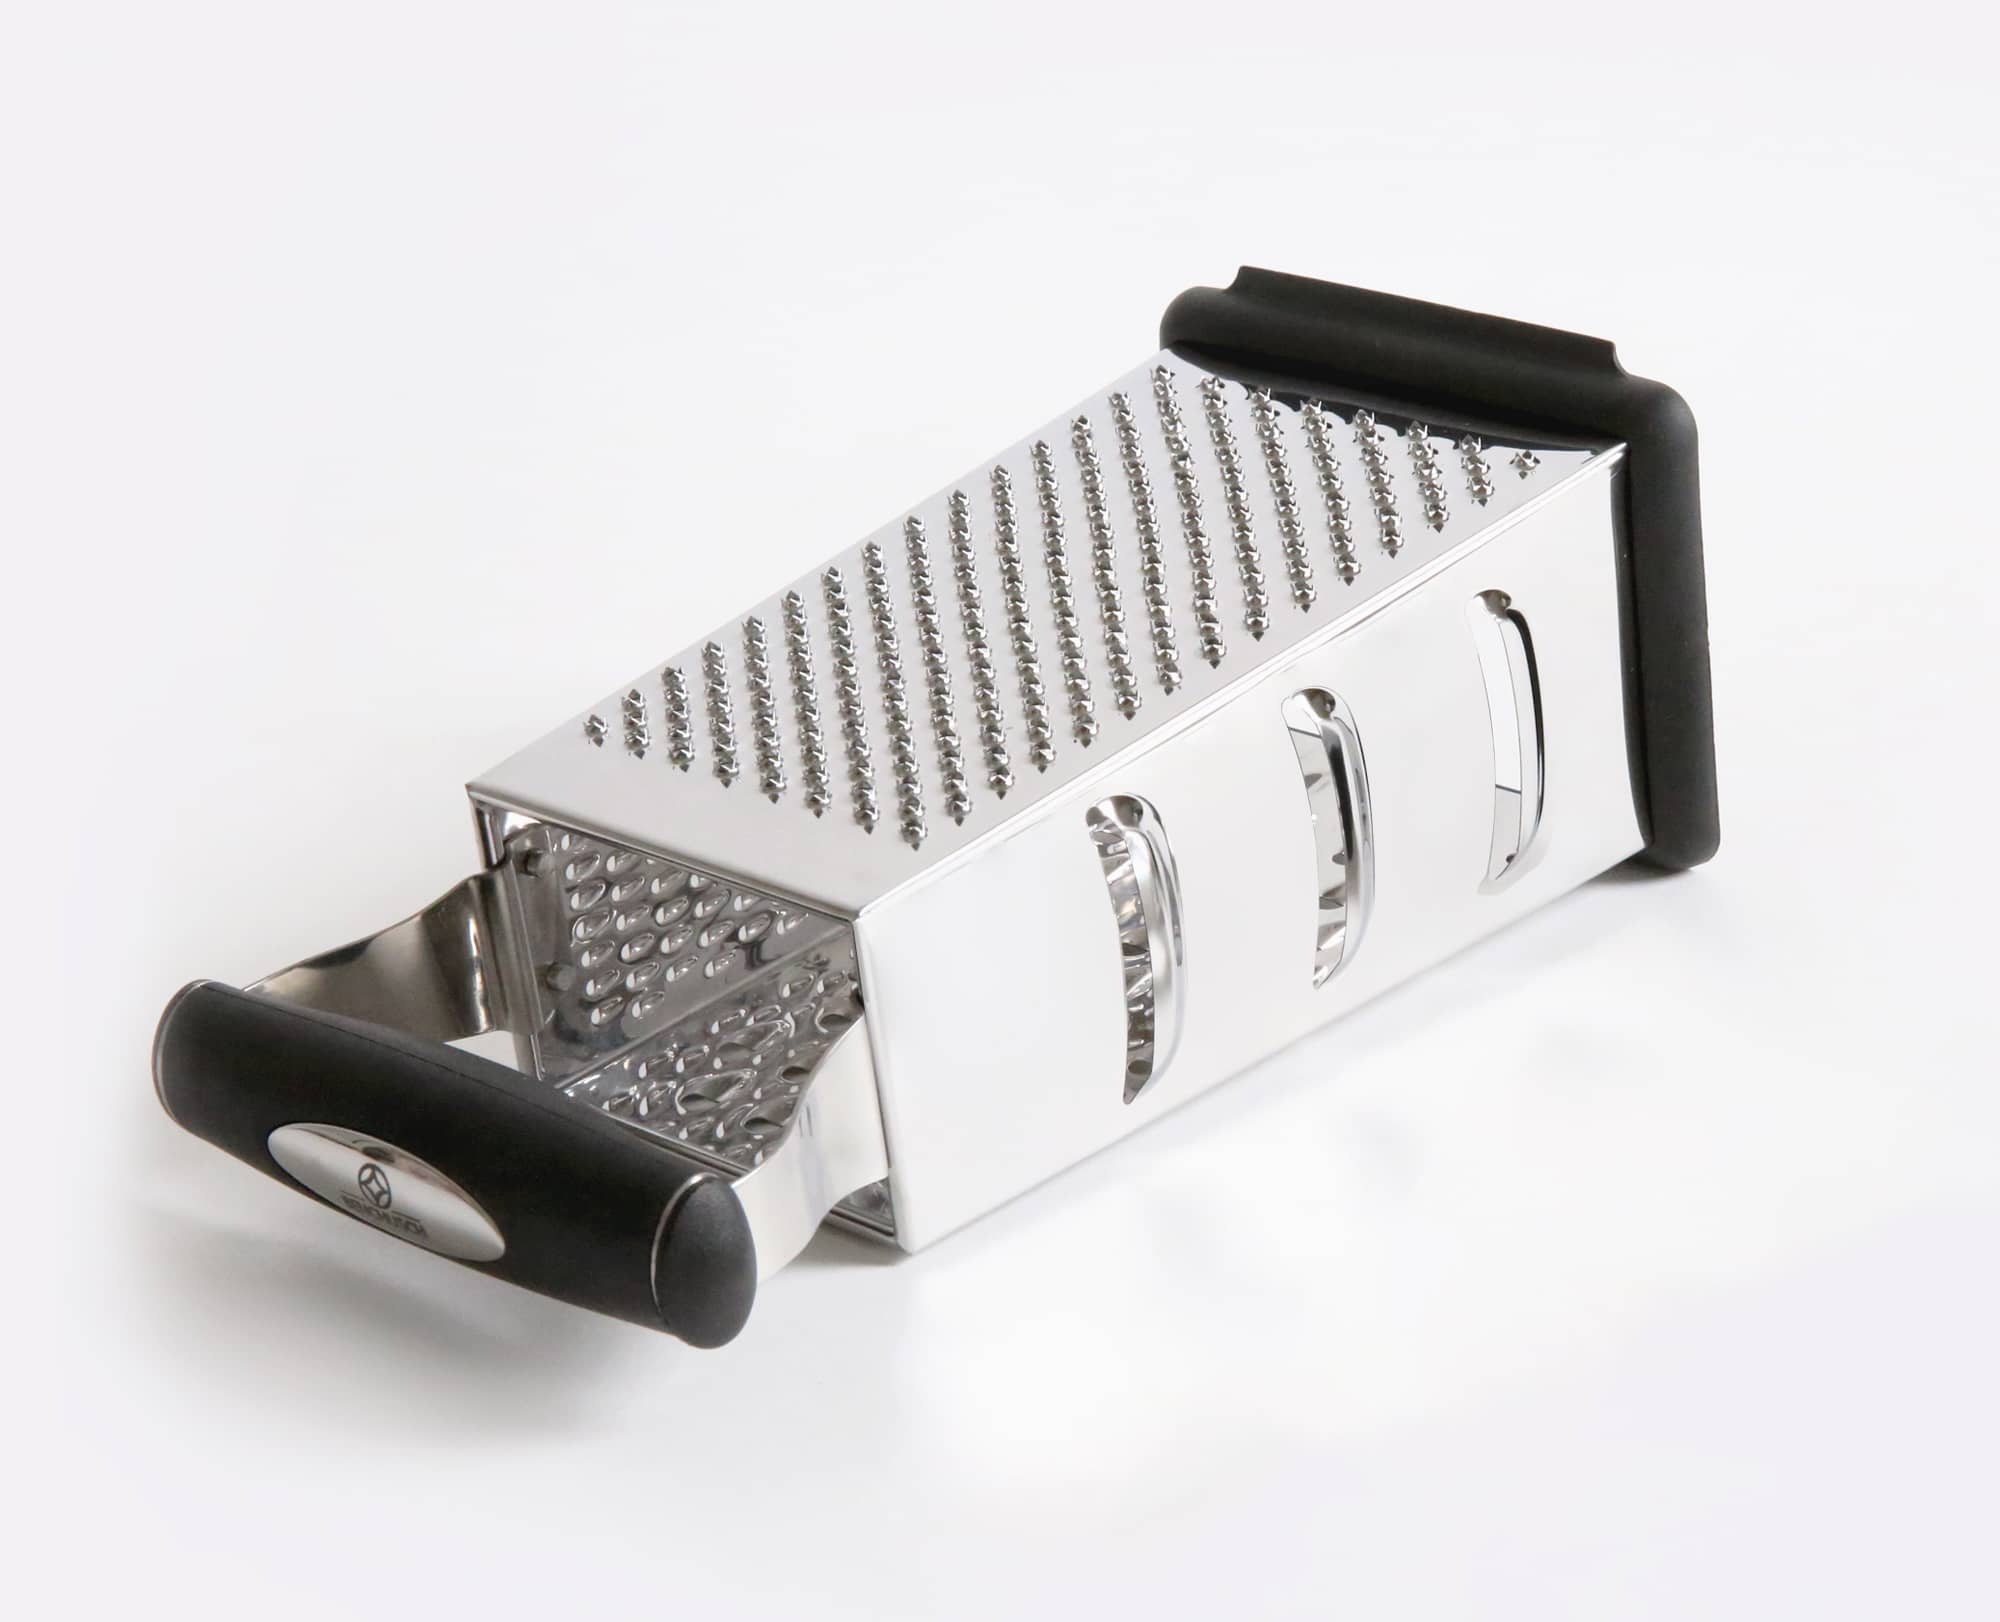 Close View of Benchusch 4 Sided Grater Box, black color with stainless steel blade, Non-Slip Base and Ergonomic Handle